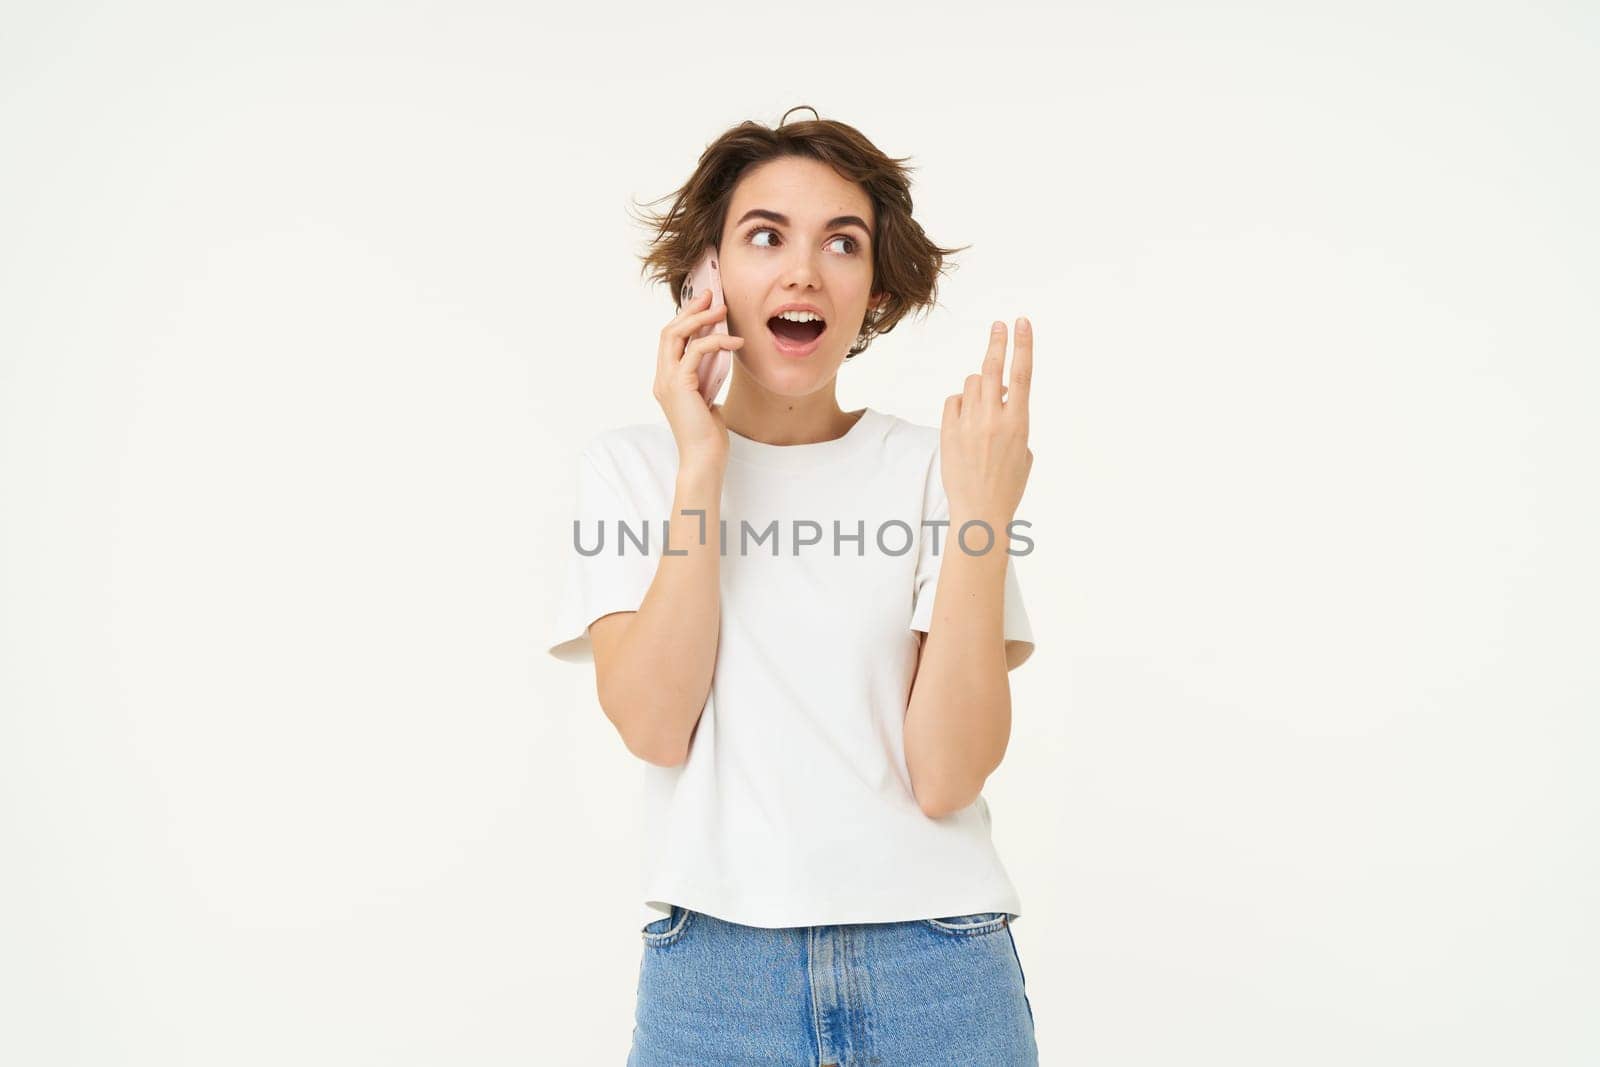 Portrait of chatty young woman, talking on mobile phone and gesturing, discussing something over the telephone conversation, standing over white background.